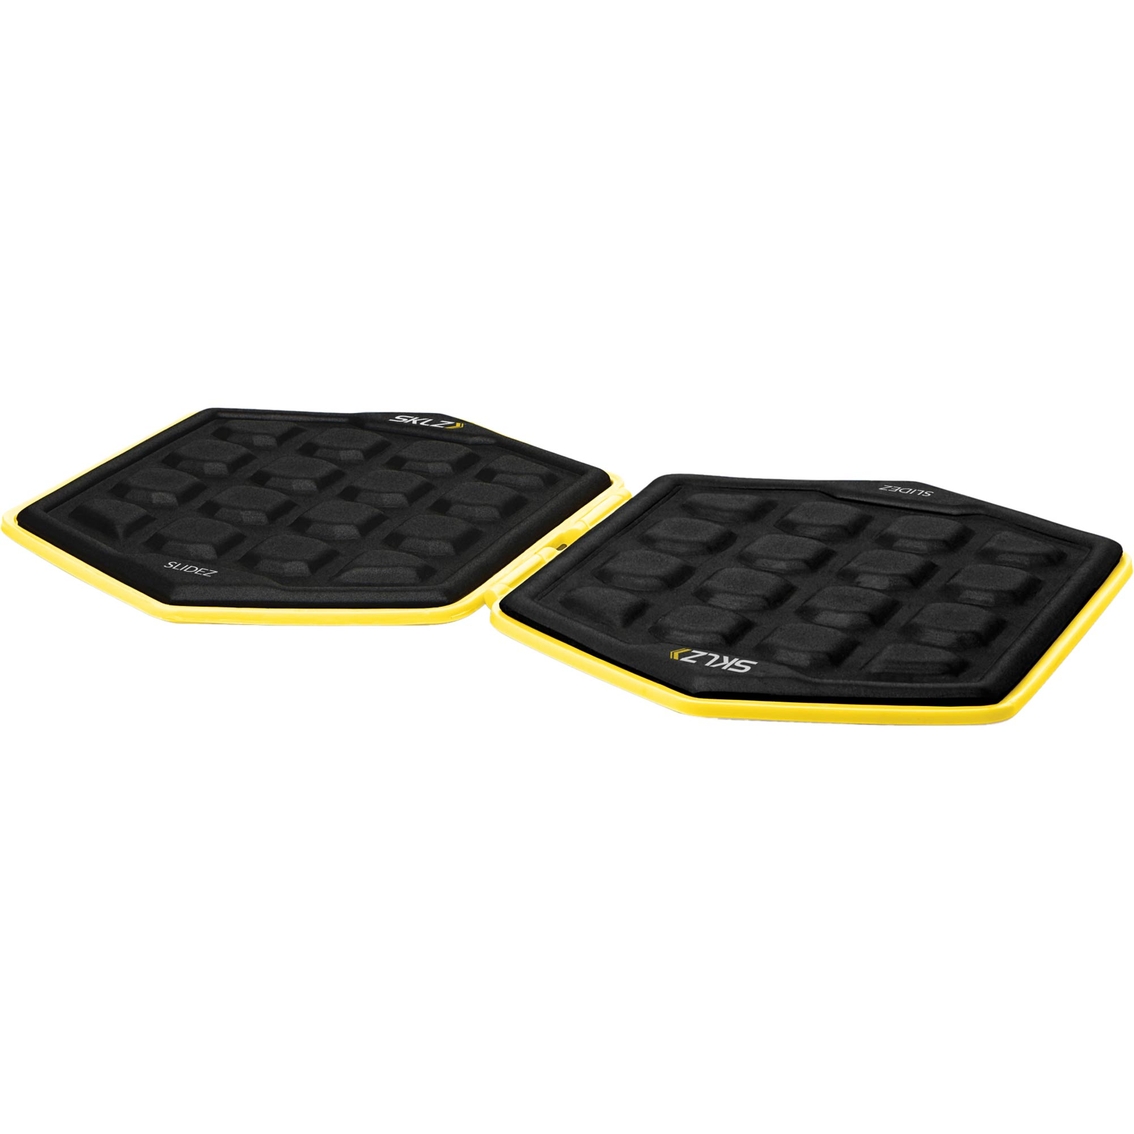 SKLZ Functional Core Stability Exercise Sliders Black/yellow for sale online 